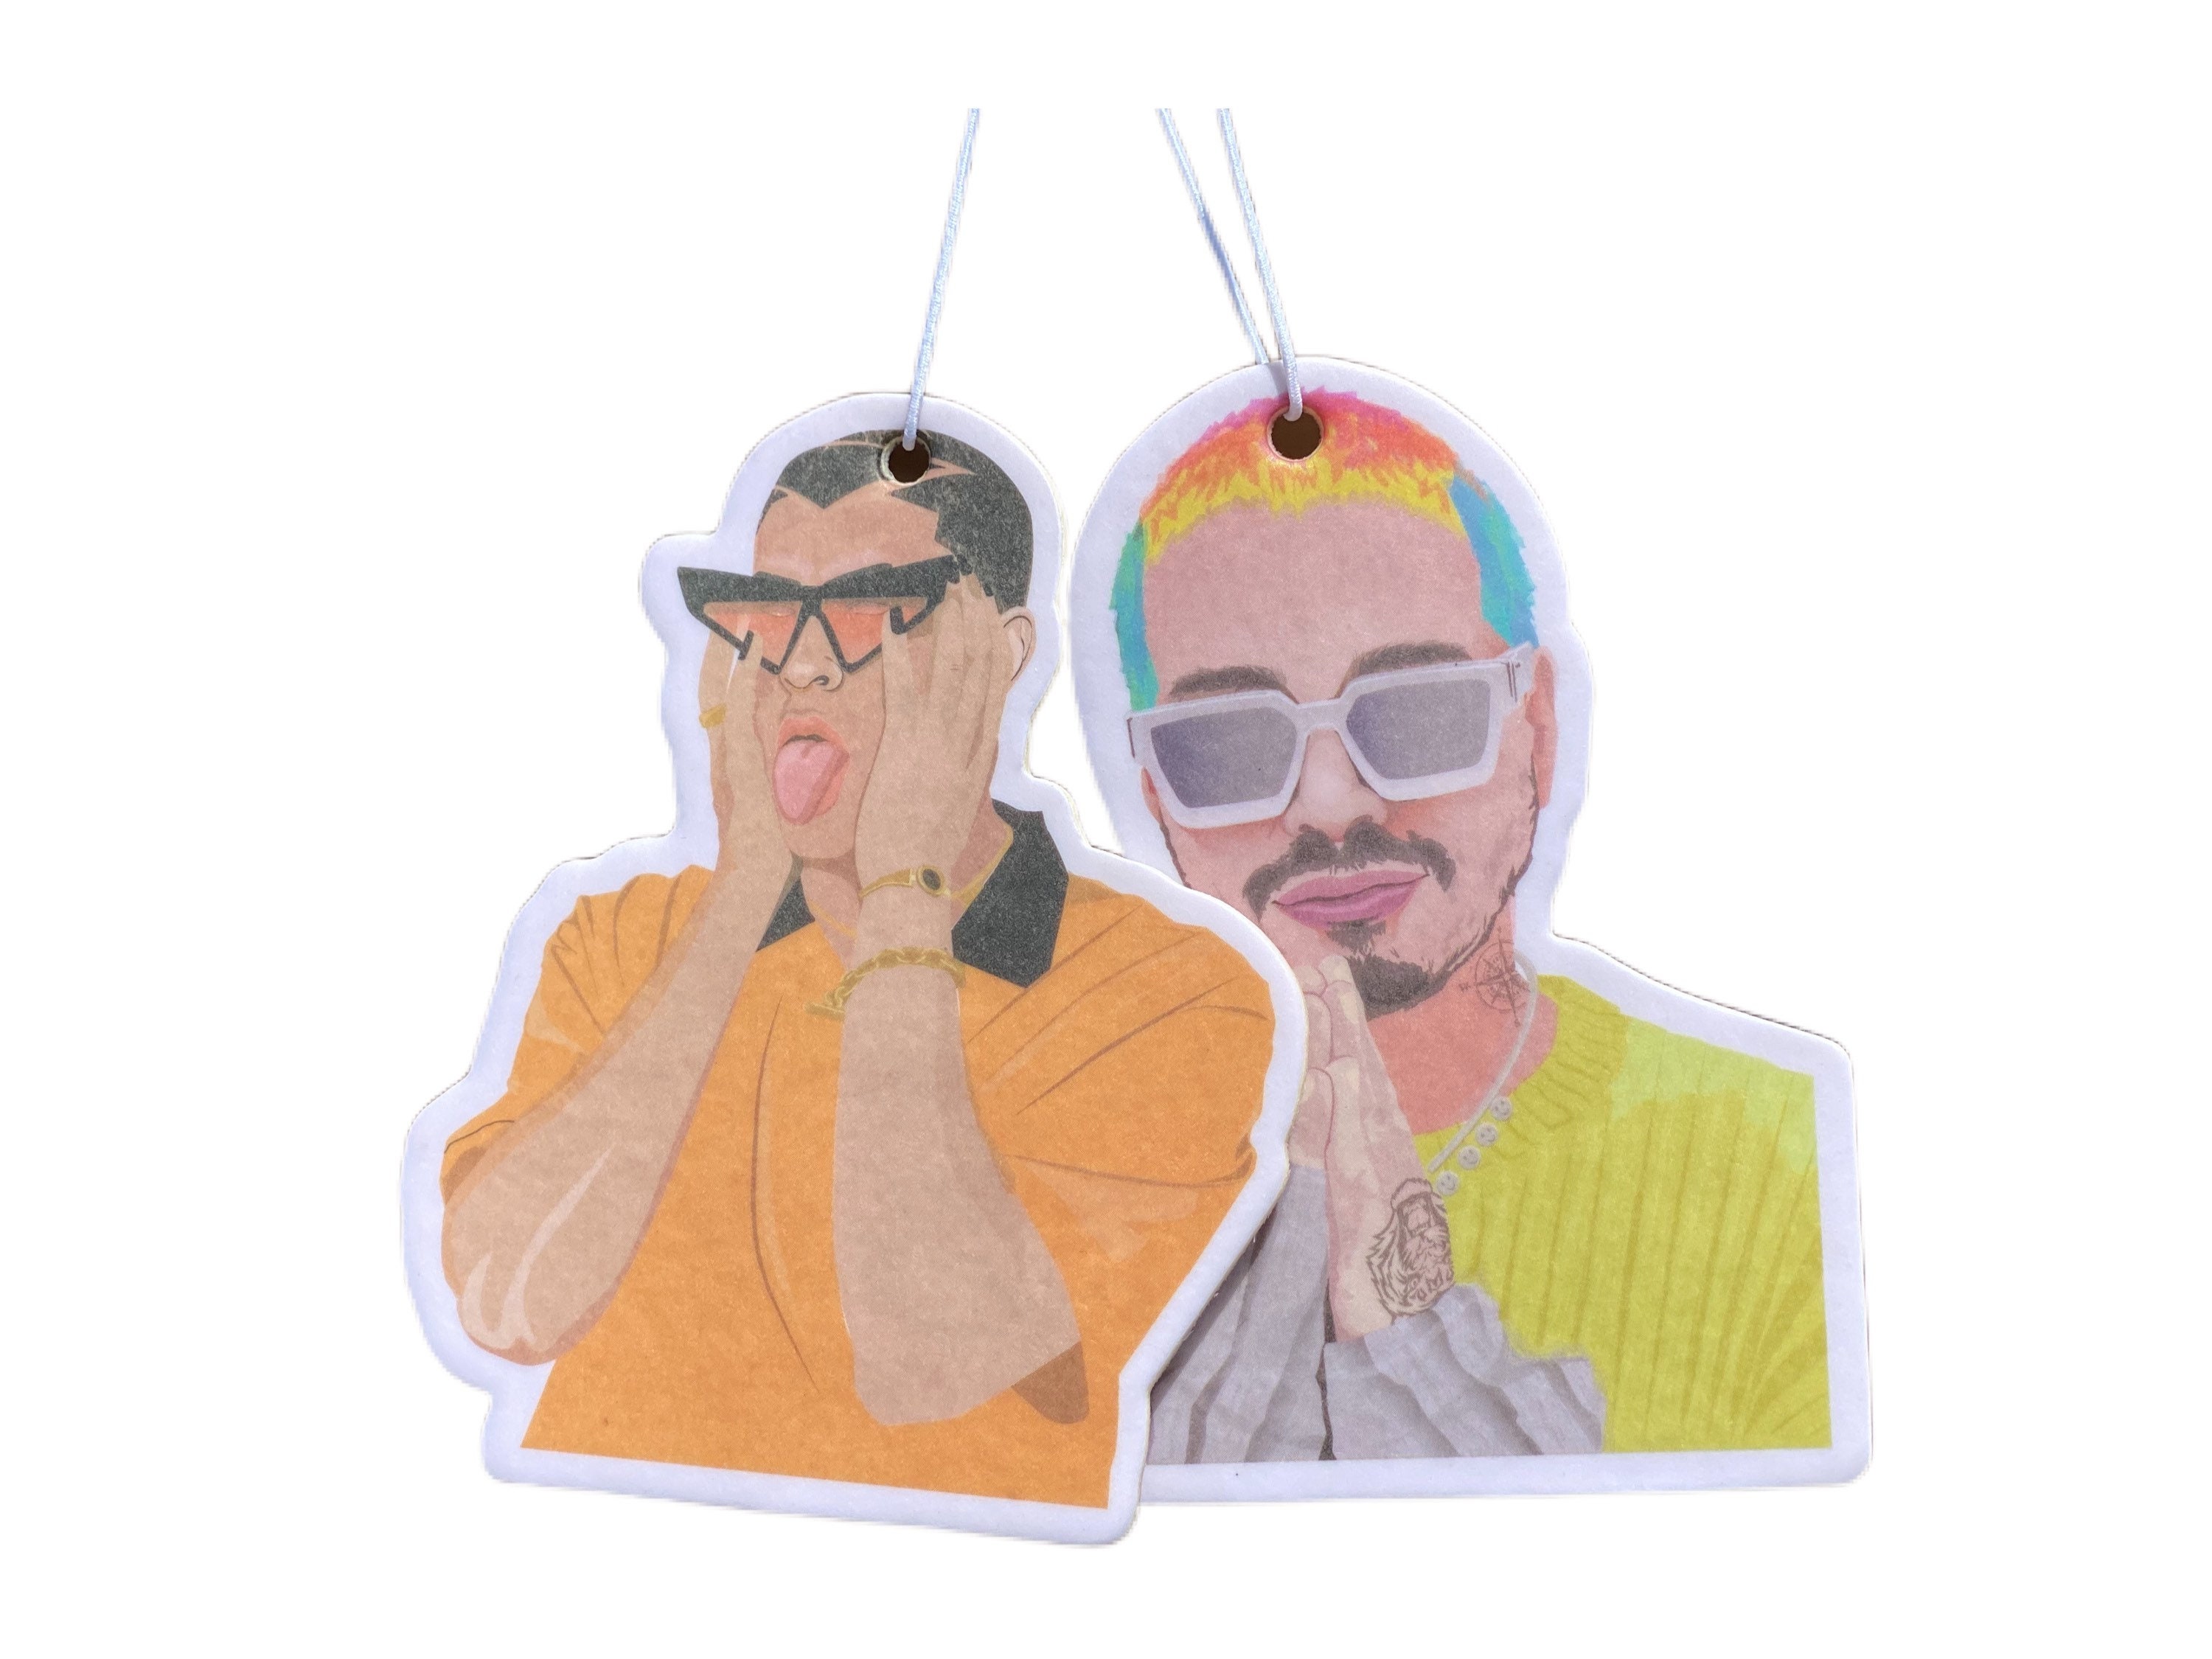 Bad Bunny Reggaeton Sticker by J Balvin for iOS & Android